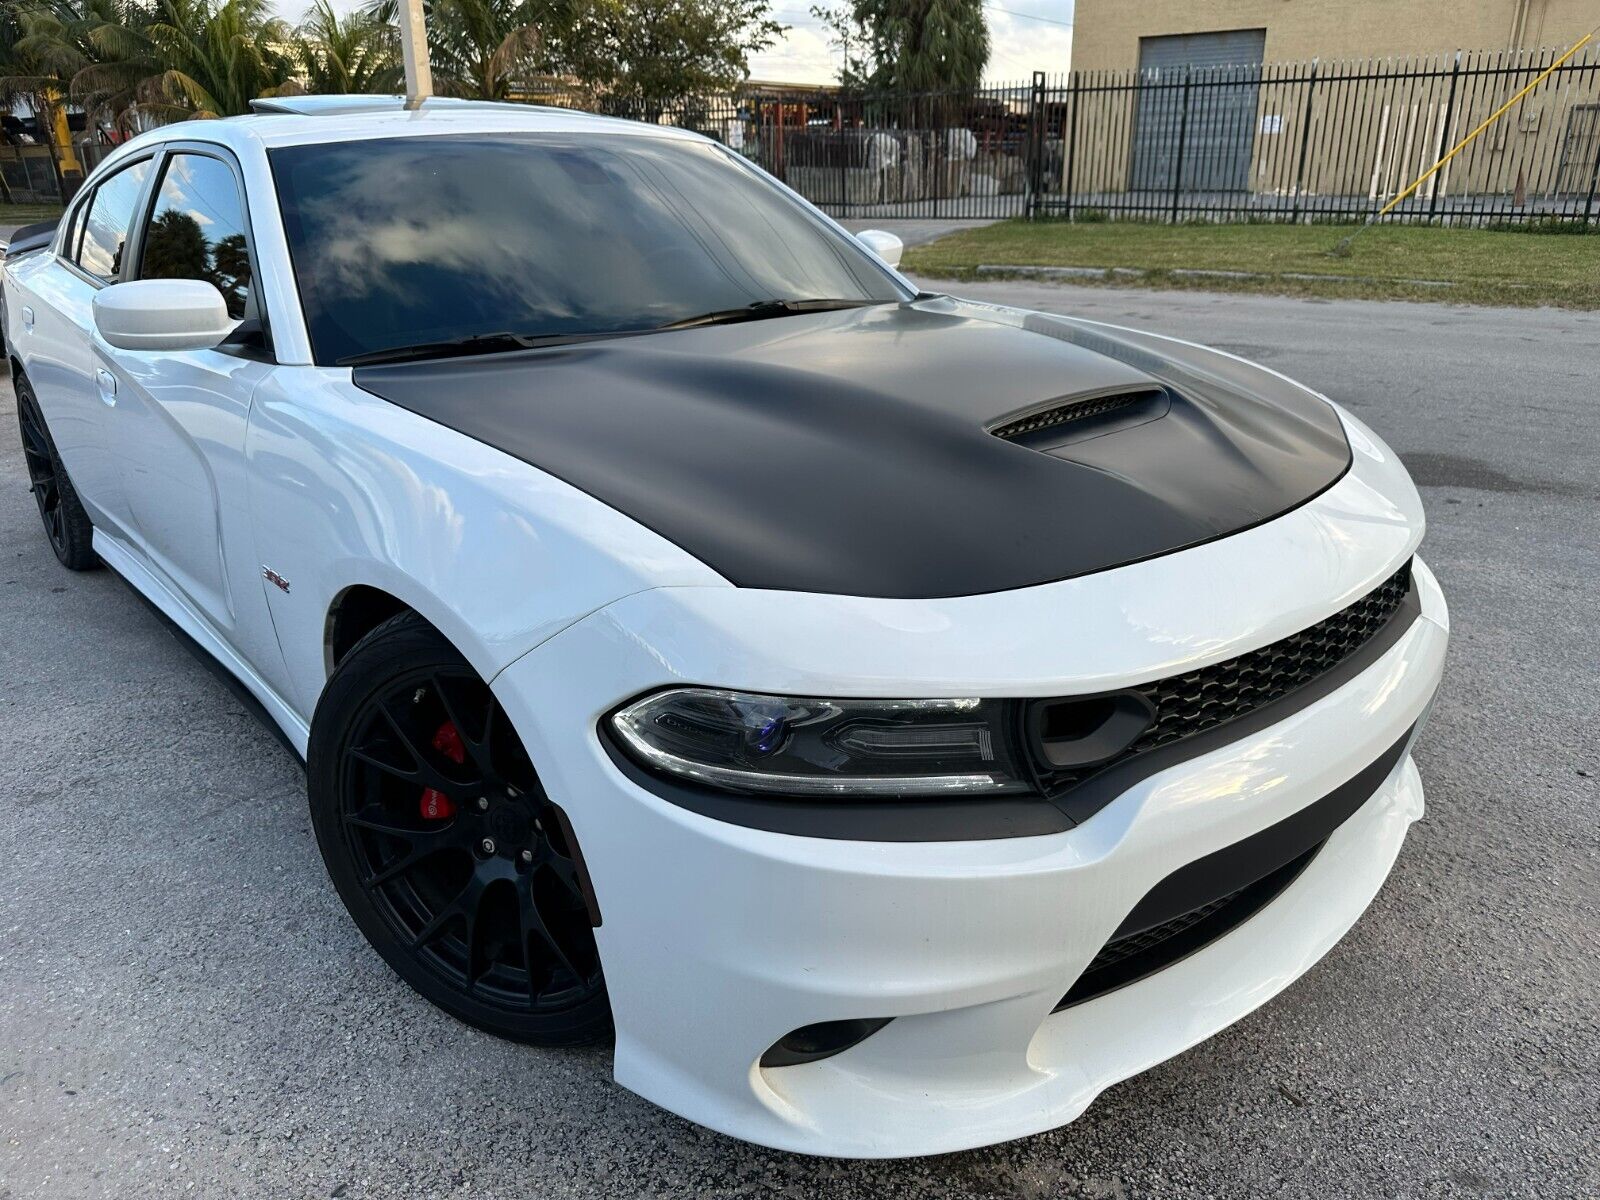 2016 DODGE CHARGER SCAT PACK 6.4 CLEAN AND CLEAR TITLE 68K MILES BEST OFFER